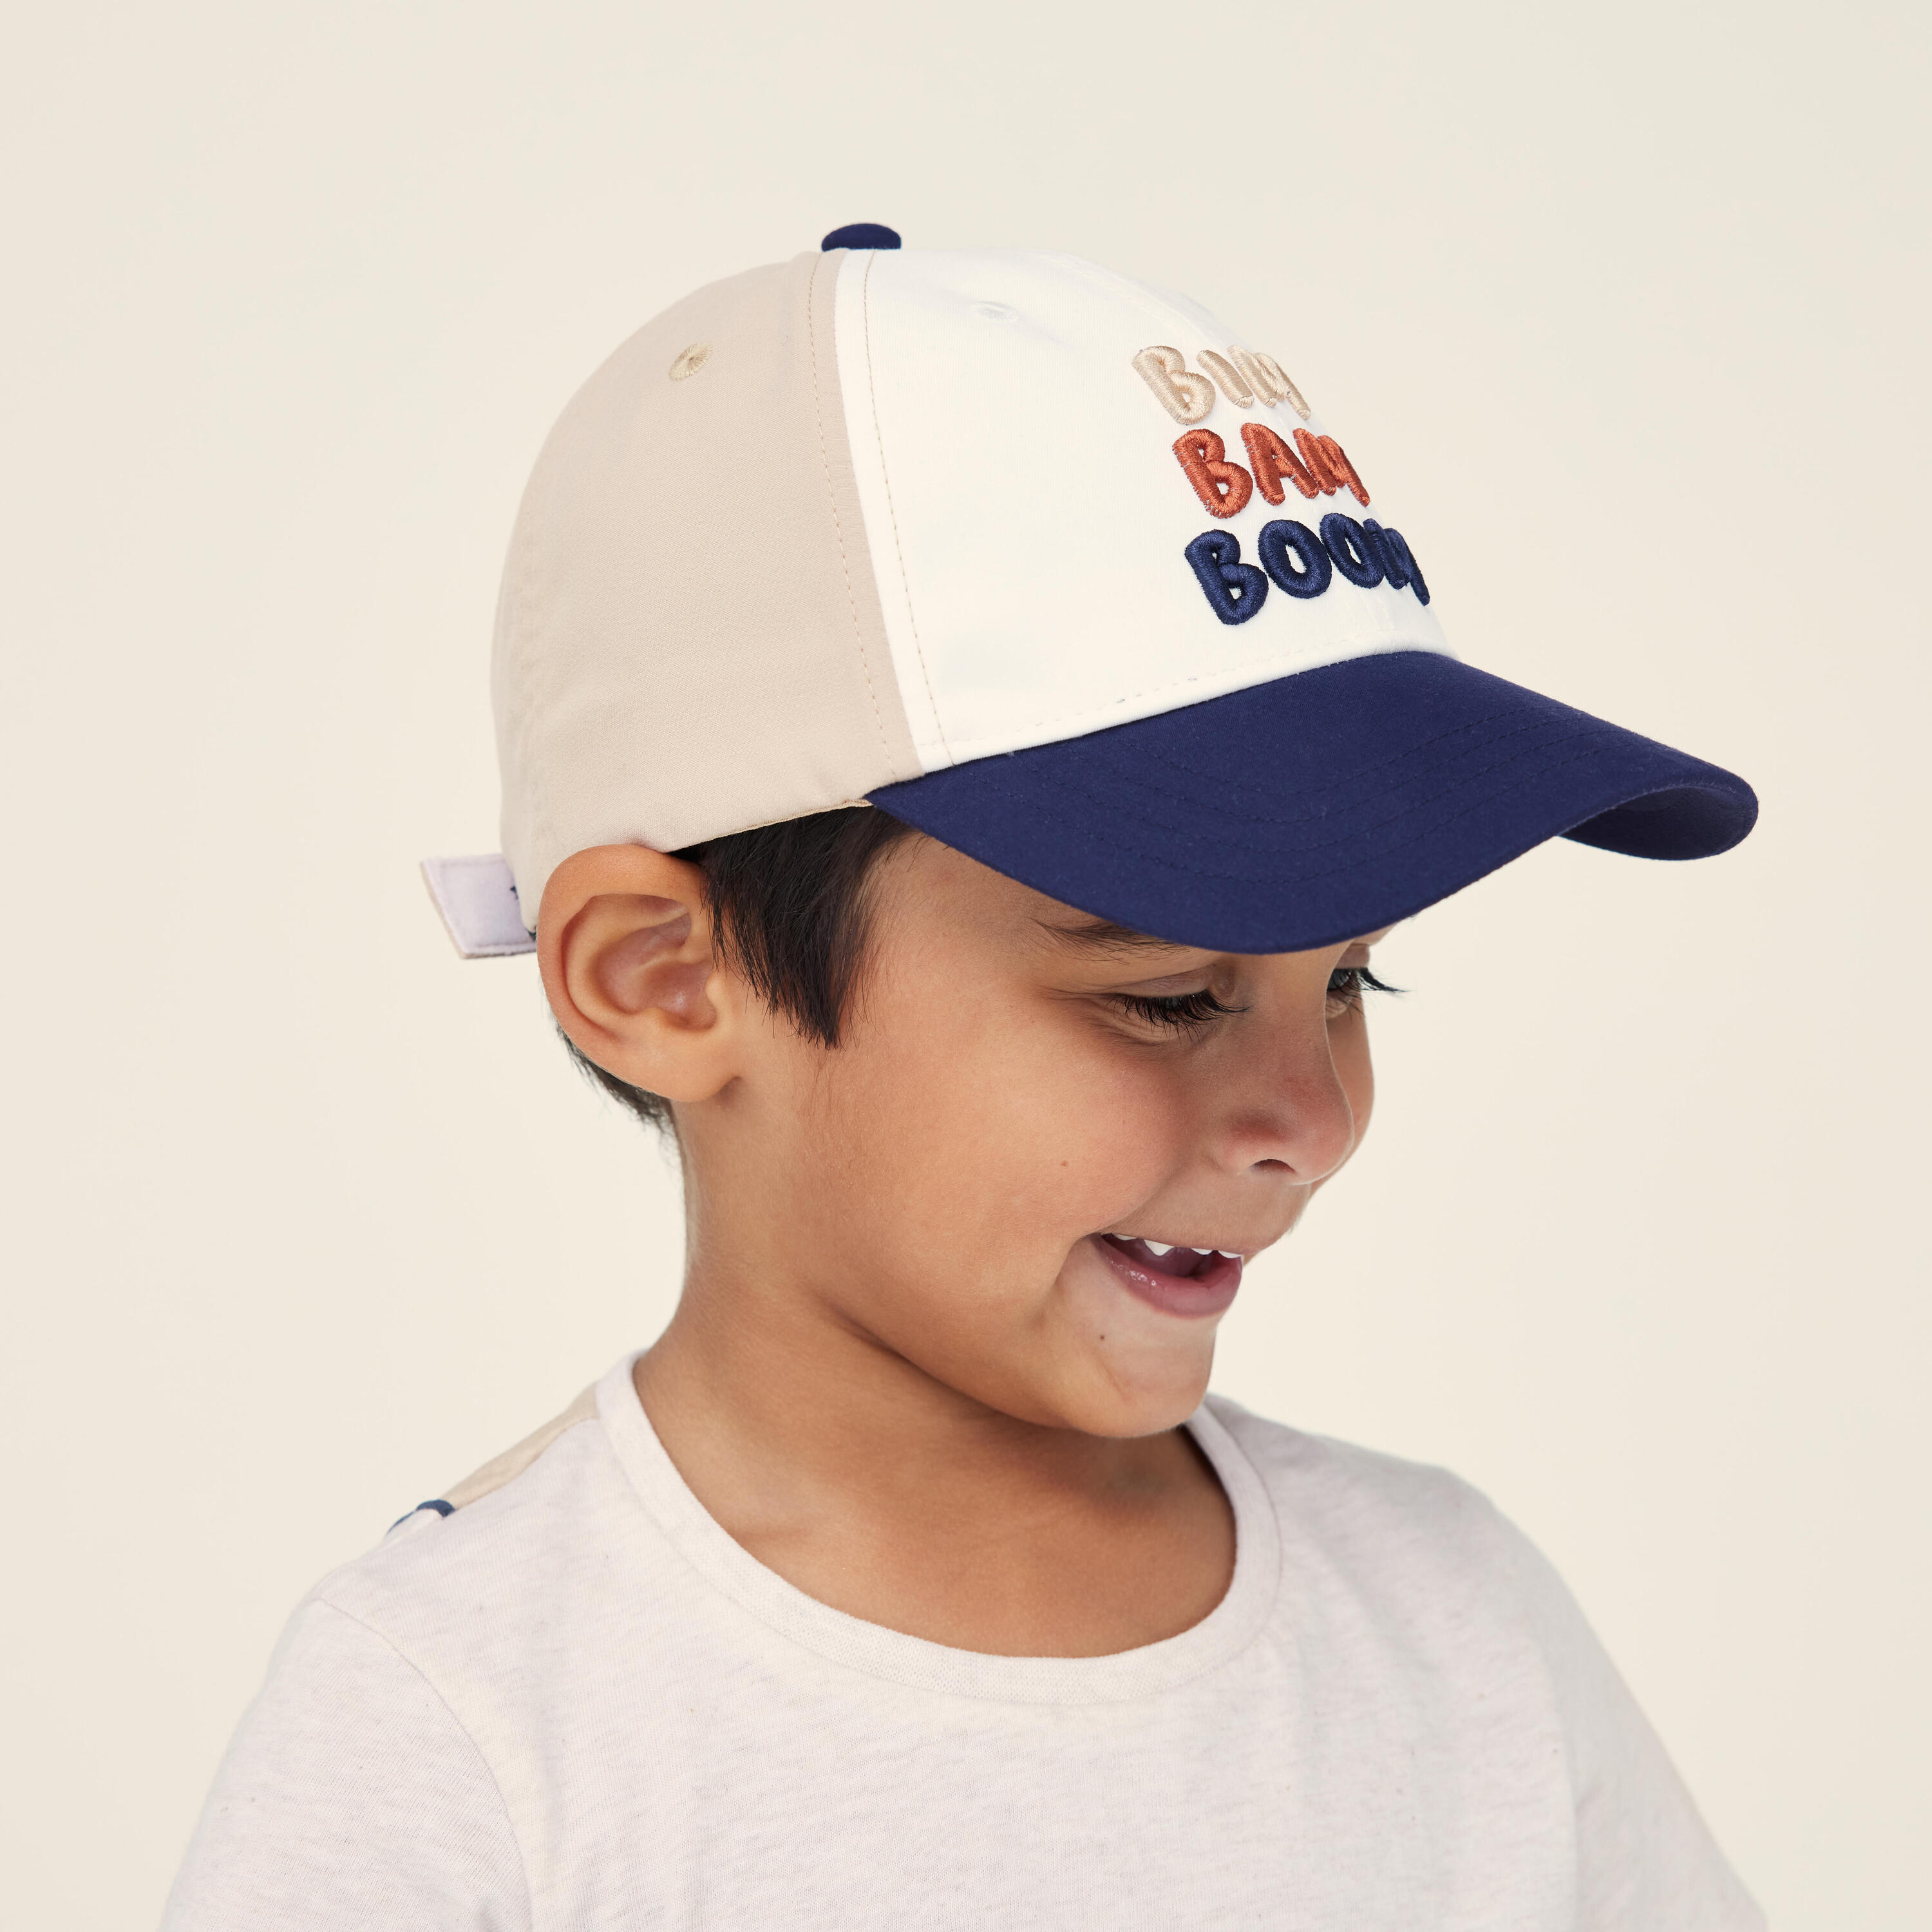 Kids' Cap 500 - Blue with Patterns 3/5